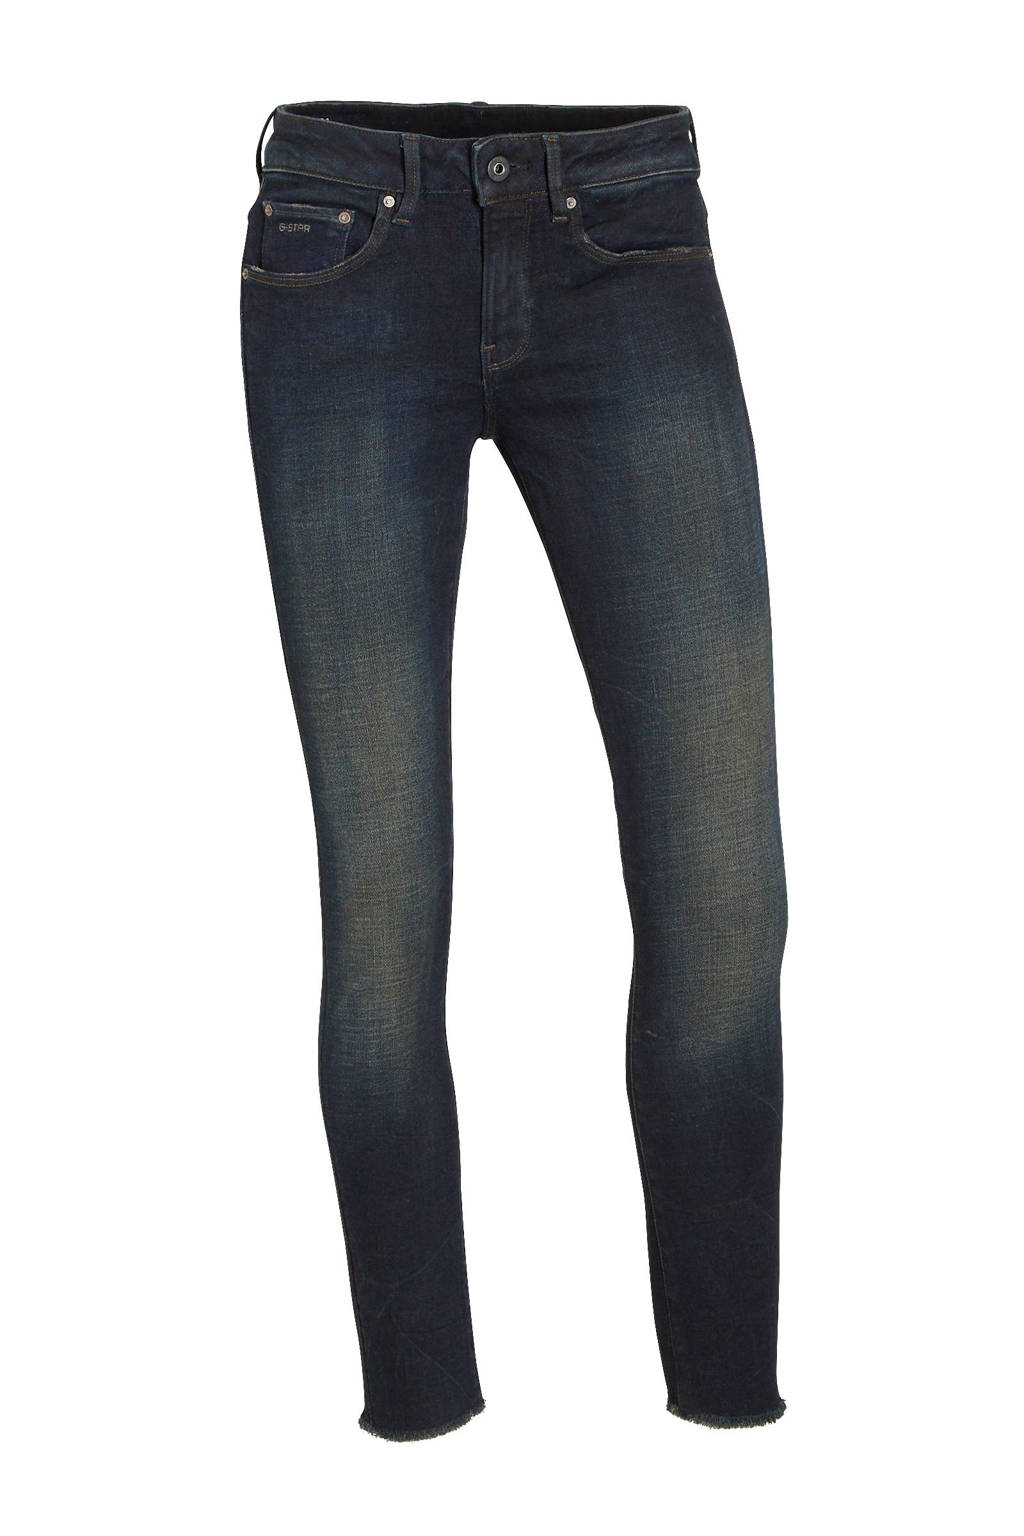 G-Star RAW 3301 cropped skinny jeans worn in moss